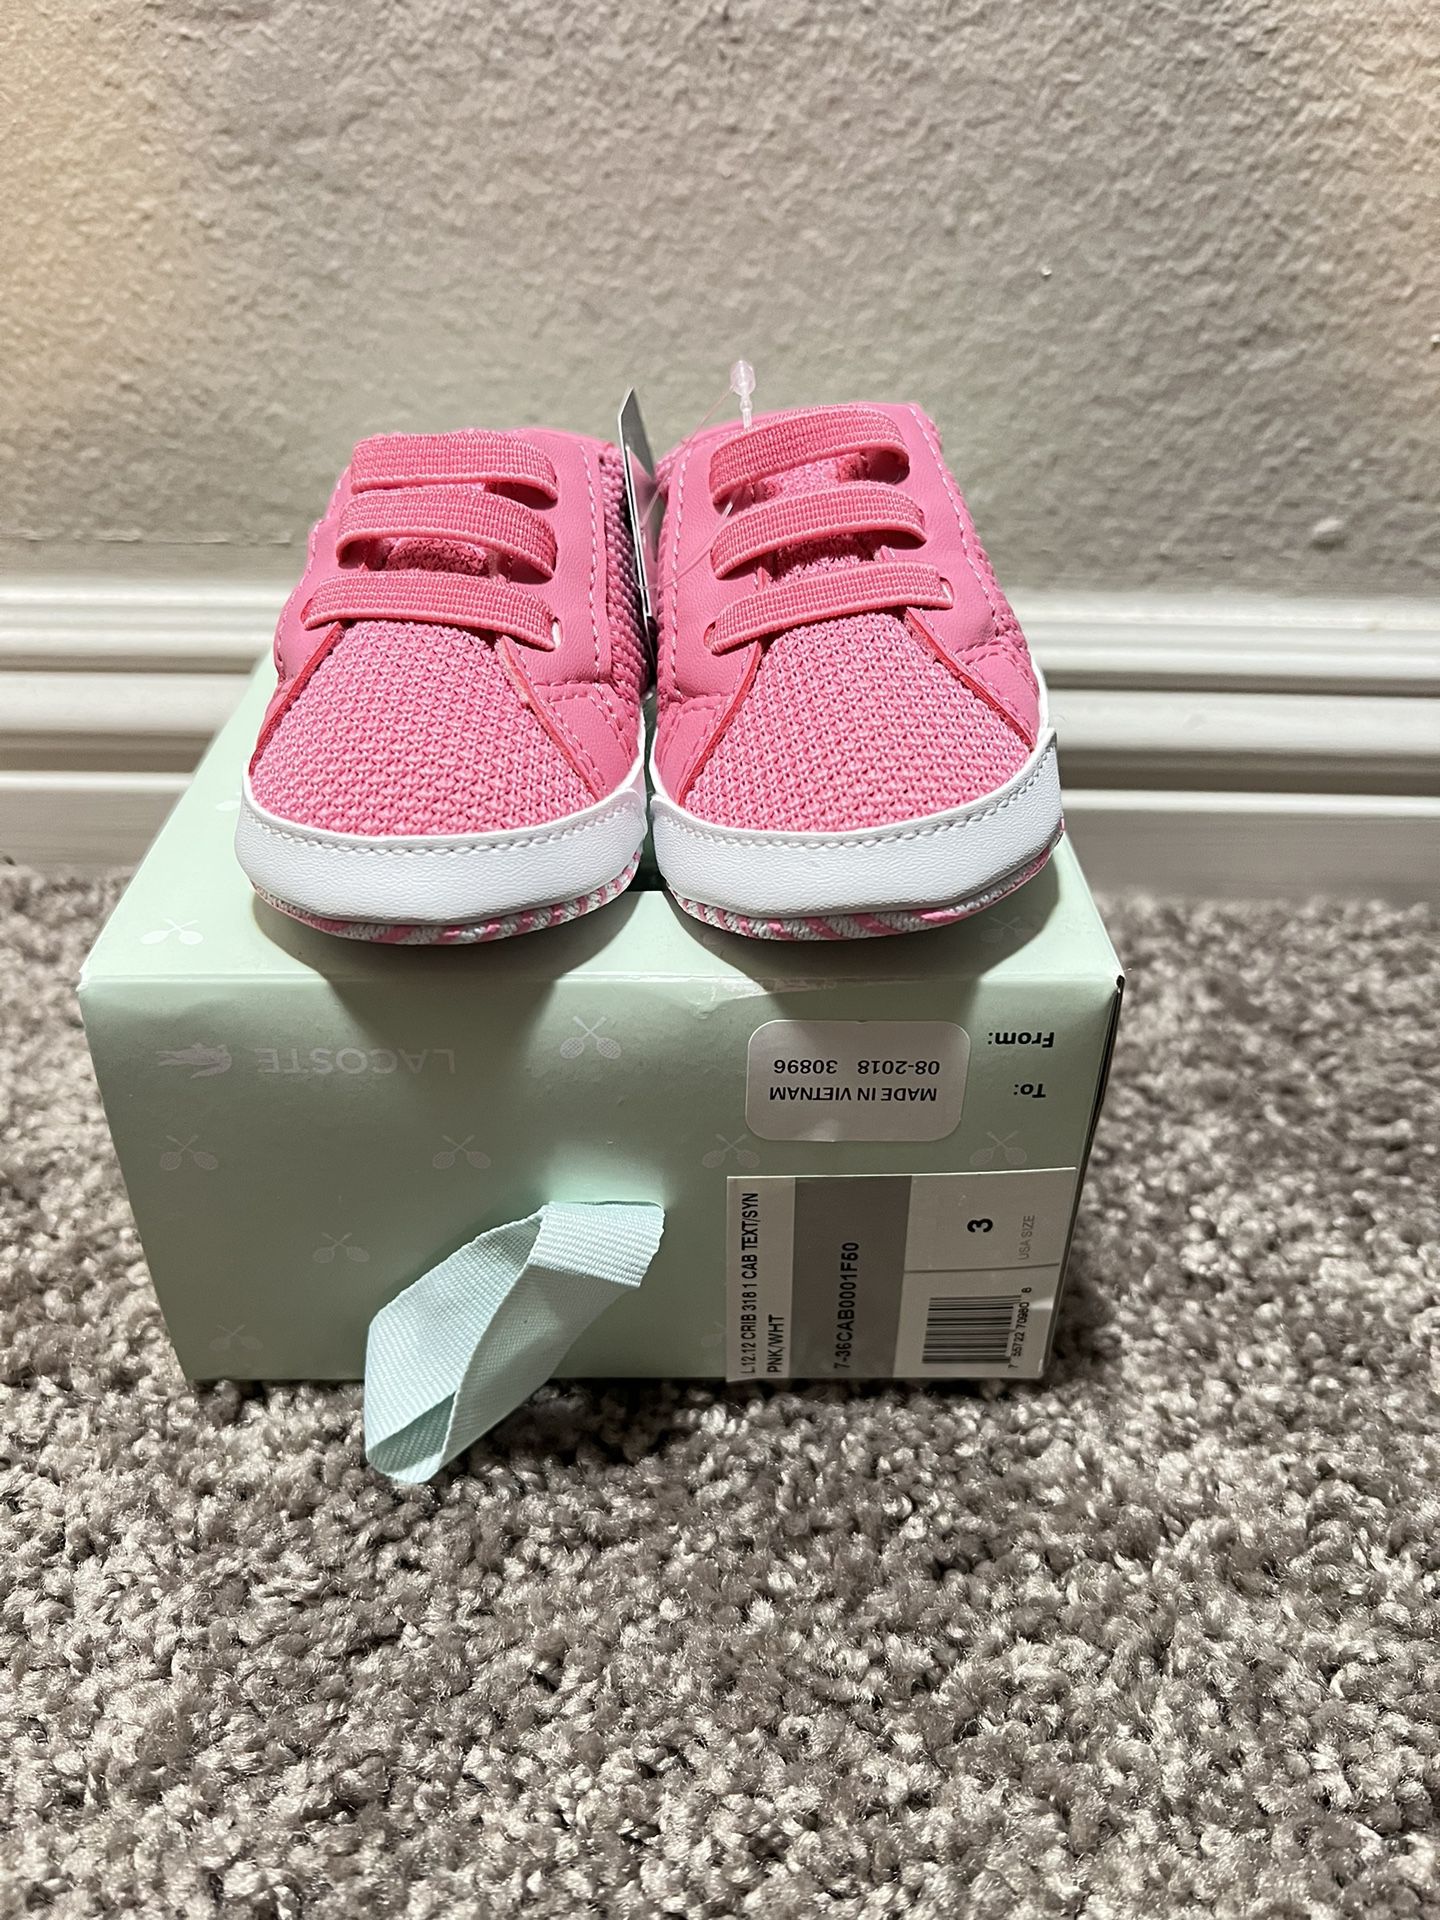 New Lacoste Pink Crib Shoes Sale in Paramount, CA - OfferUp